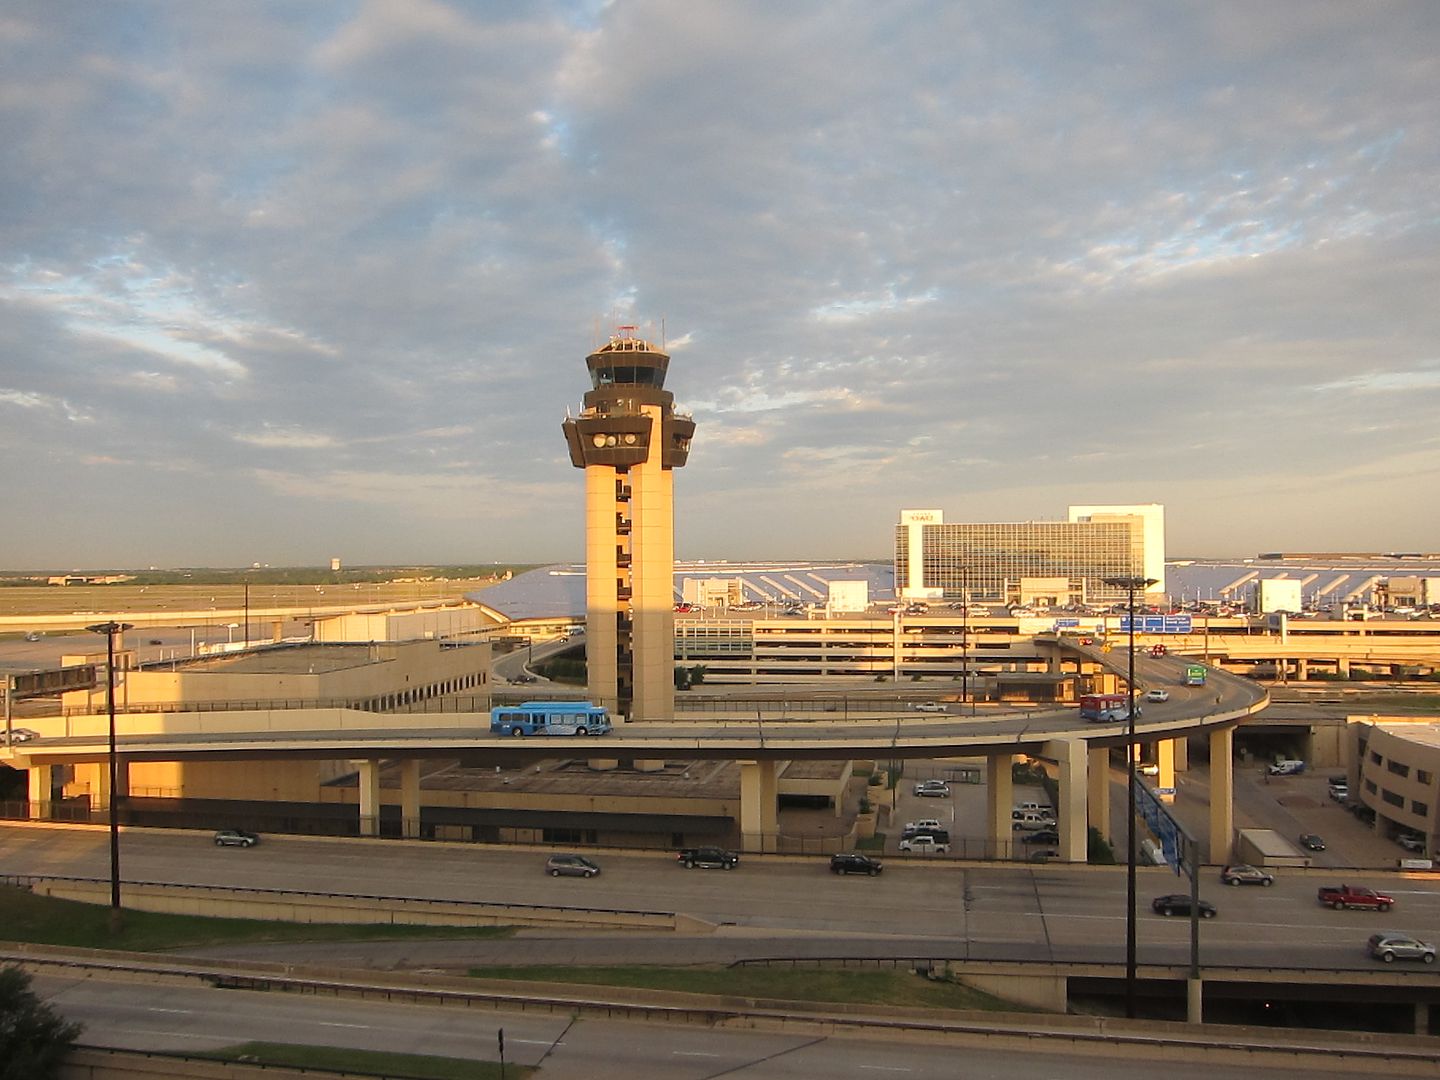 dfw is one of the best airports in the US